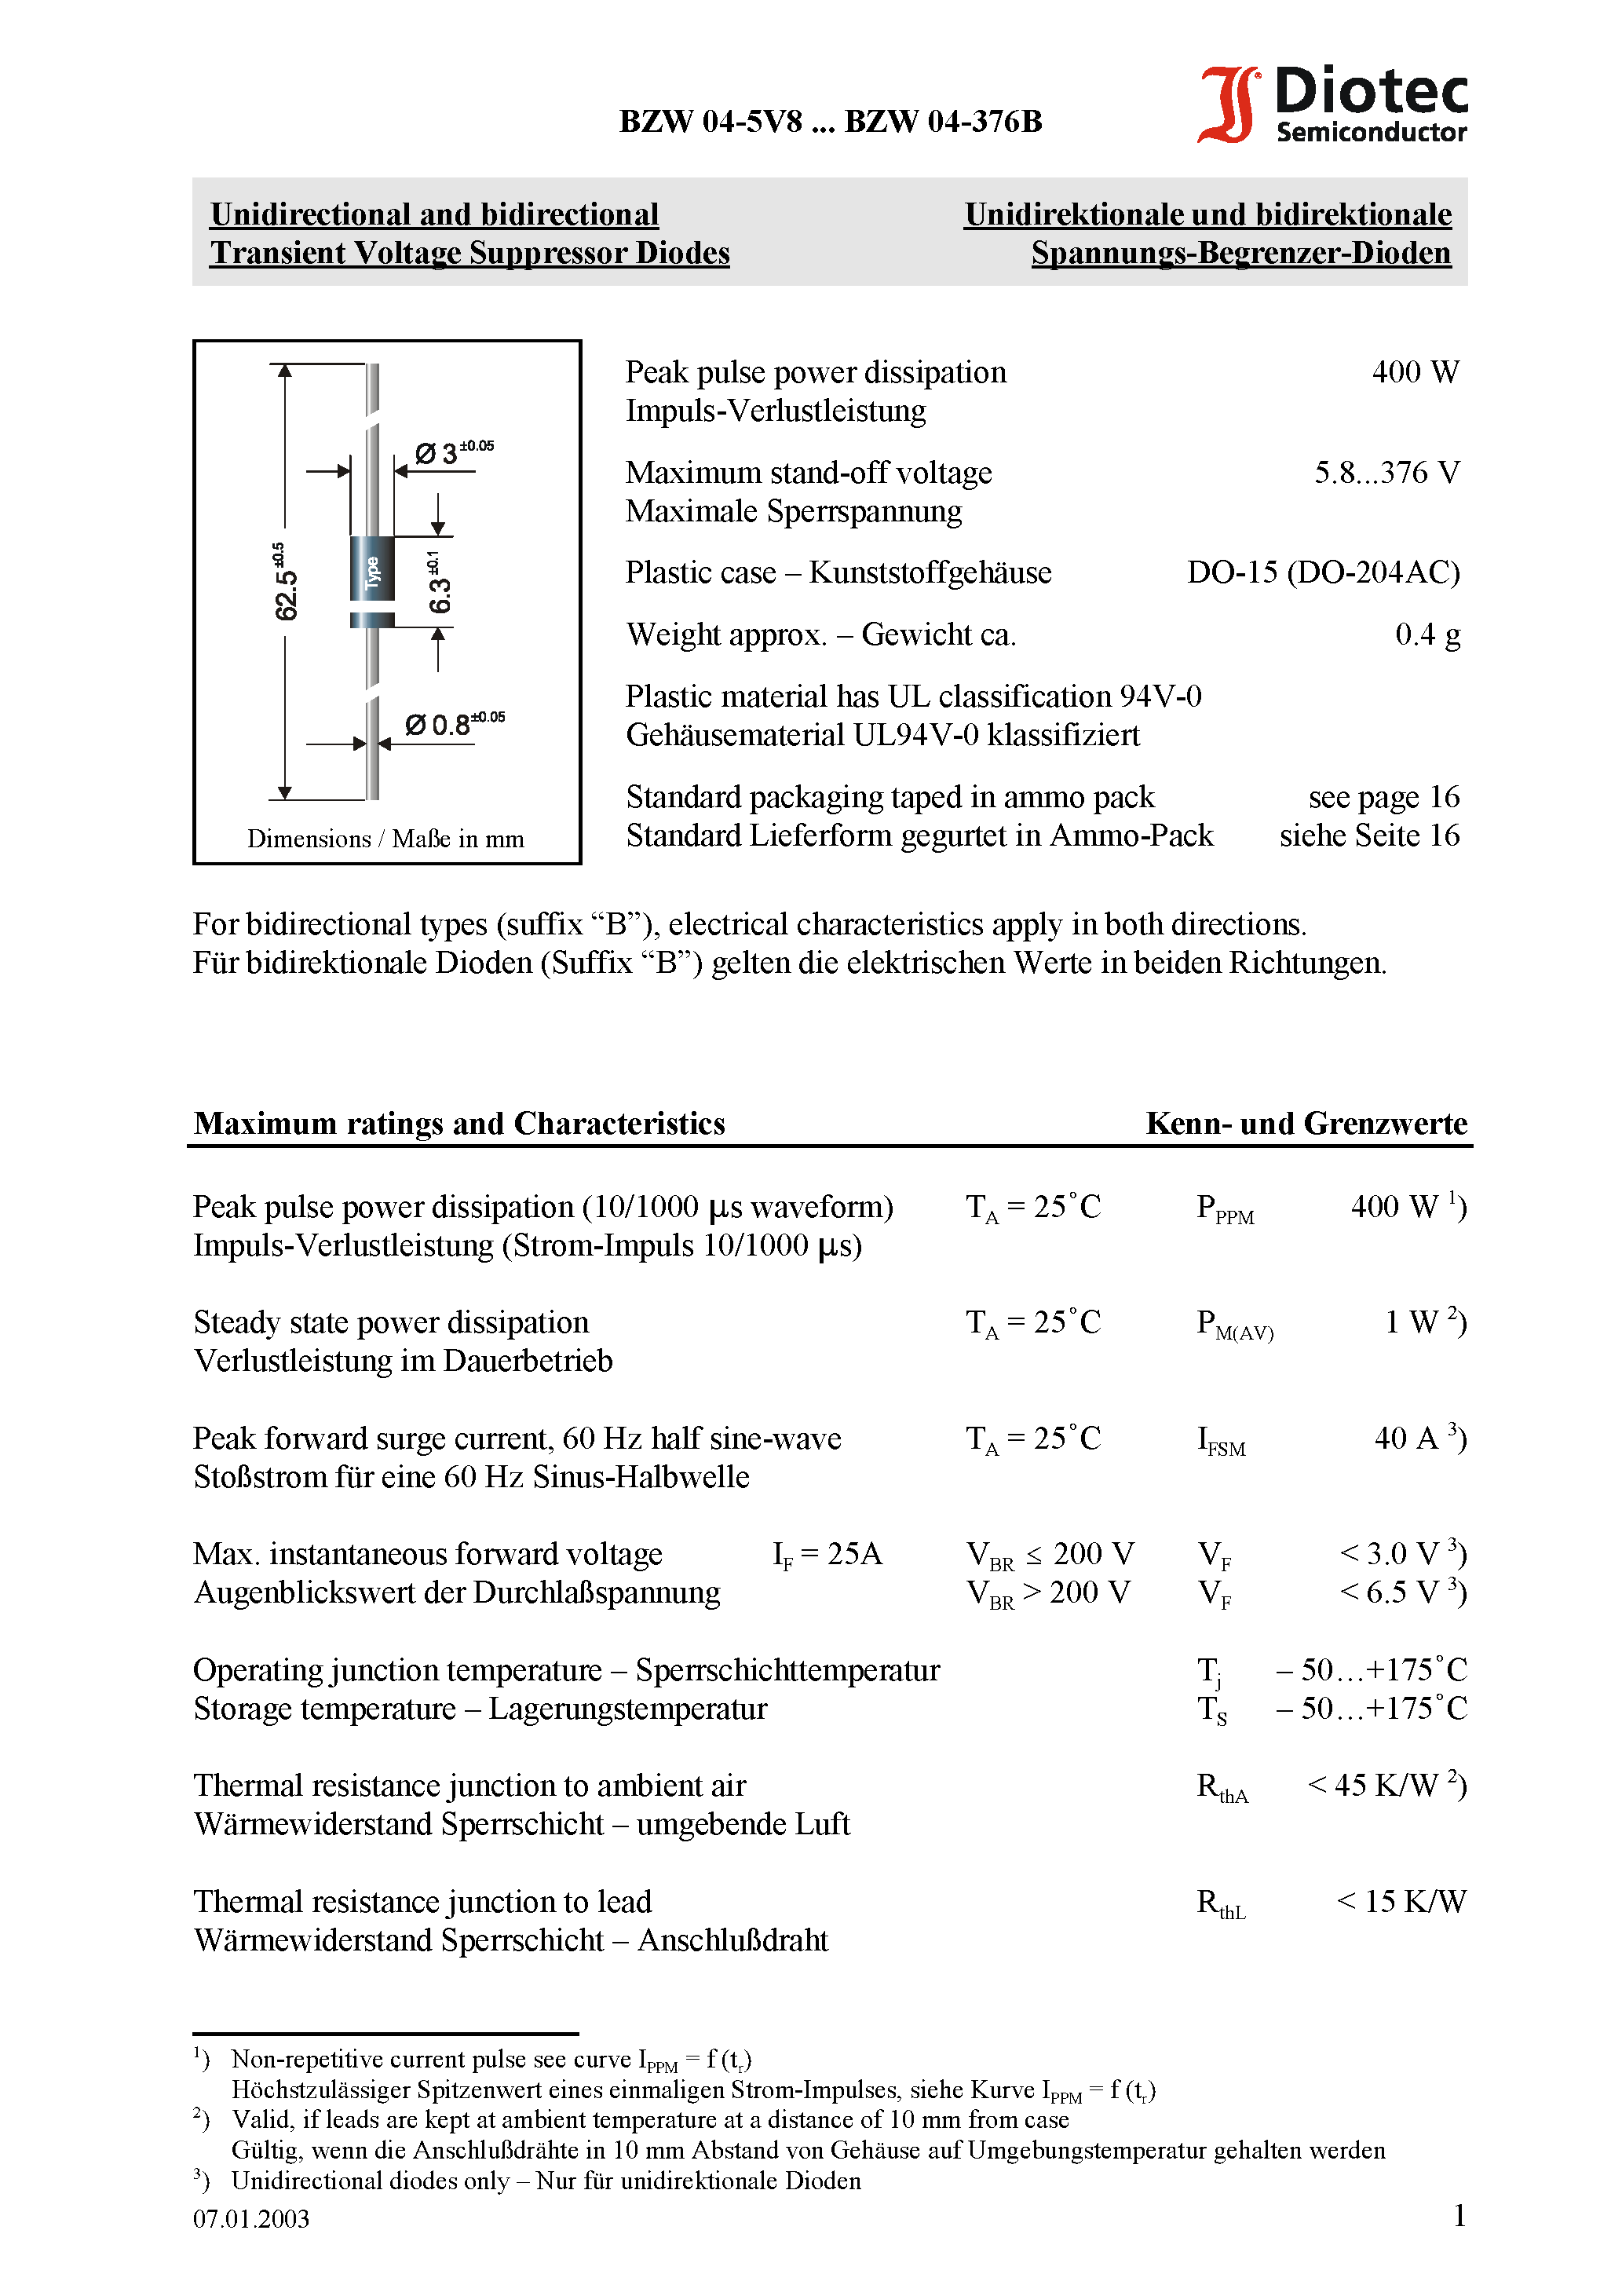 Datasheet BZW04-102 - Unidirectional and bidirectional Transient Voltage Suppressor Diodes page 1